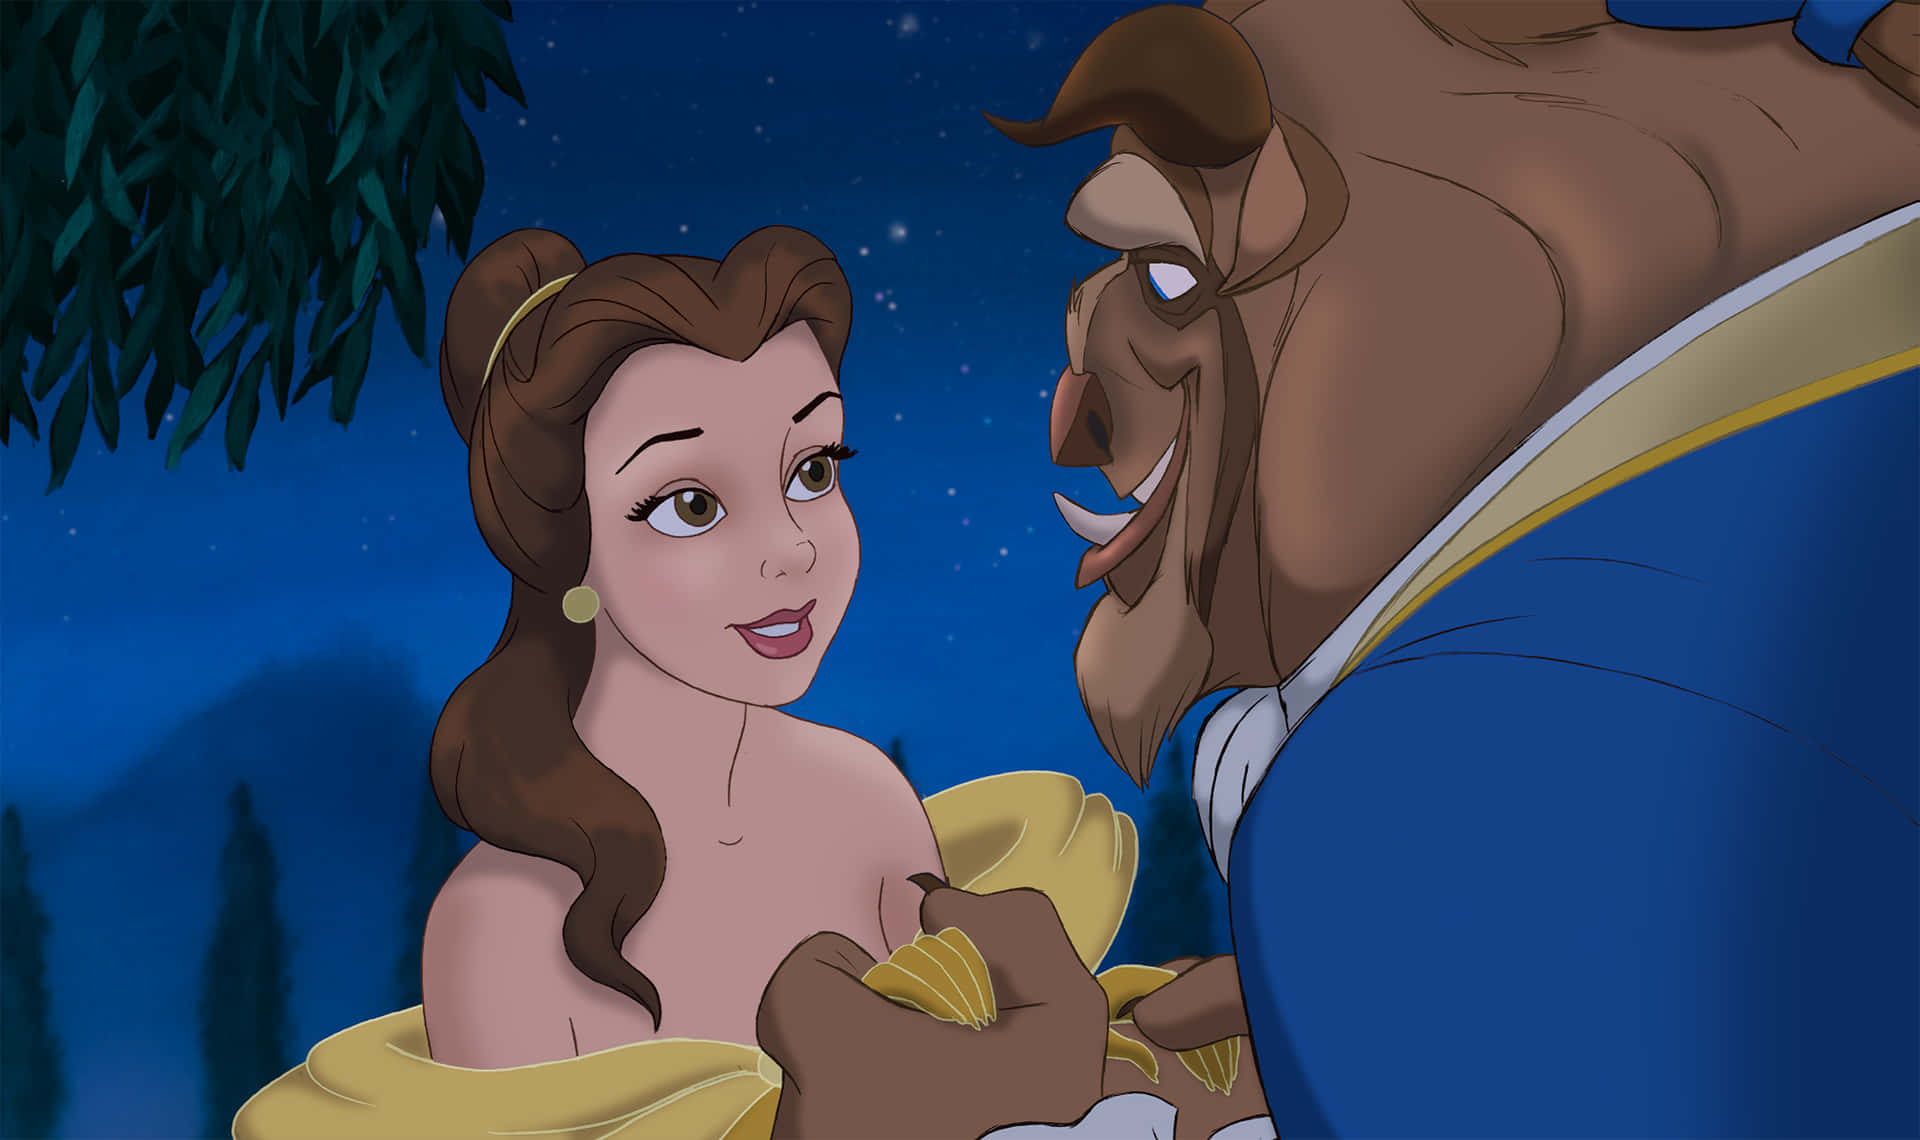 Happy Reunion | Description: Belle (Emma Watson) reunites with the Beast (Dan Stevens) in the 2017 live action remake of Disney’s classic Beauty and the Beast.